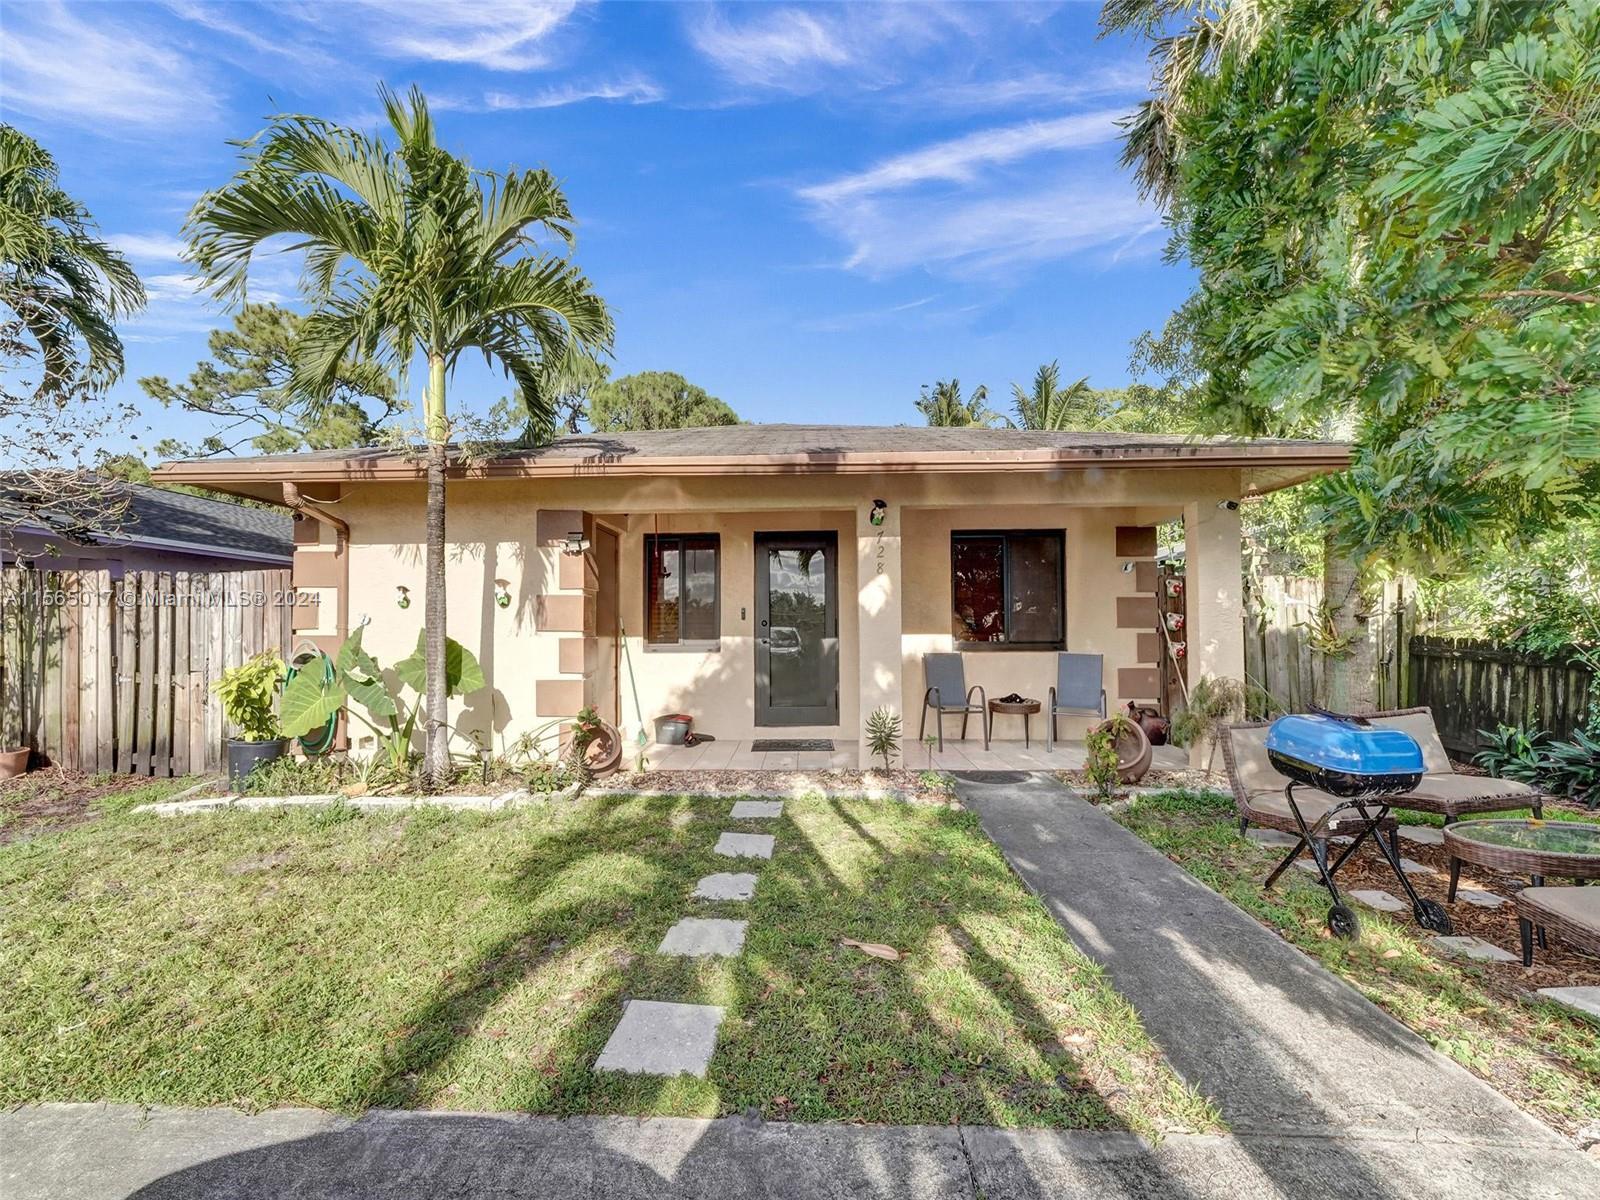 728 Sw 16th Ave, Fort Lauderdale, Broward County, Florida - 4 Bedrooms  
2 Bathrooms - 